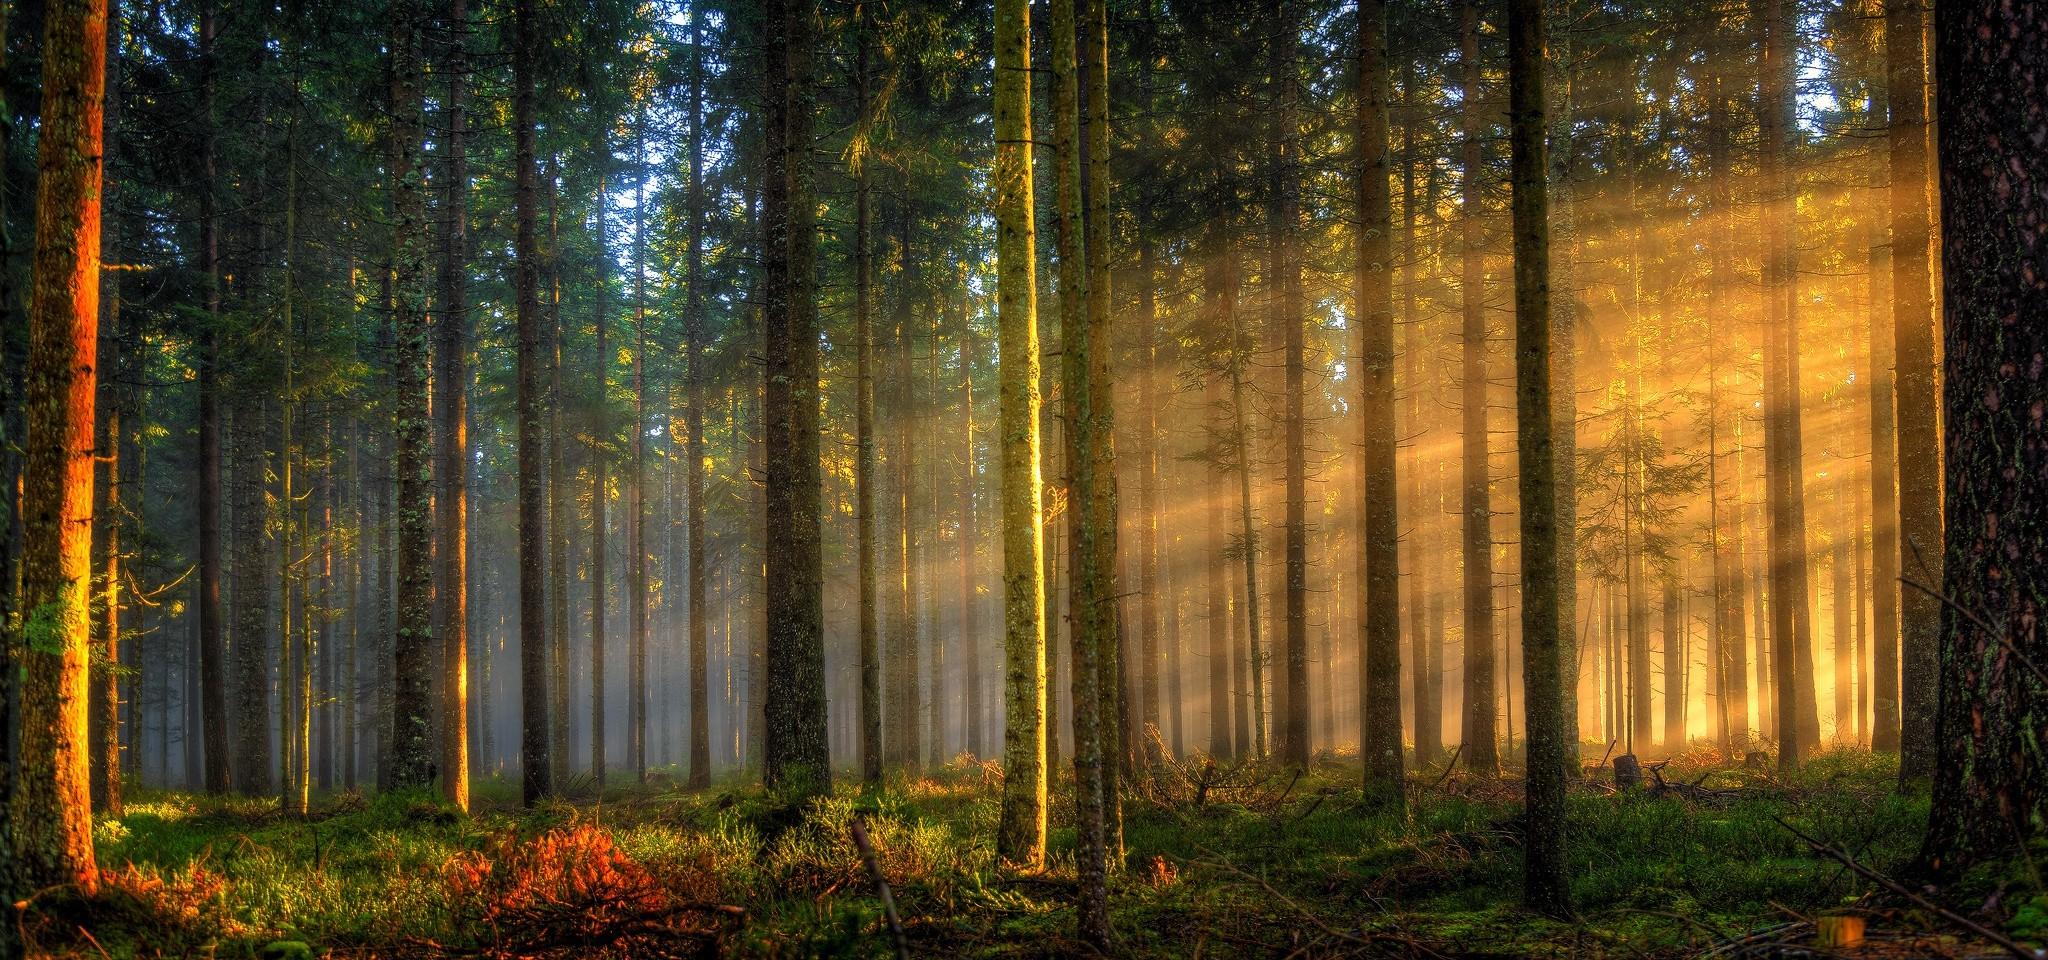 #forest, #trees, #landscape, #sunlight, #Germany, #grass